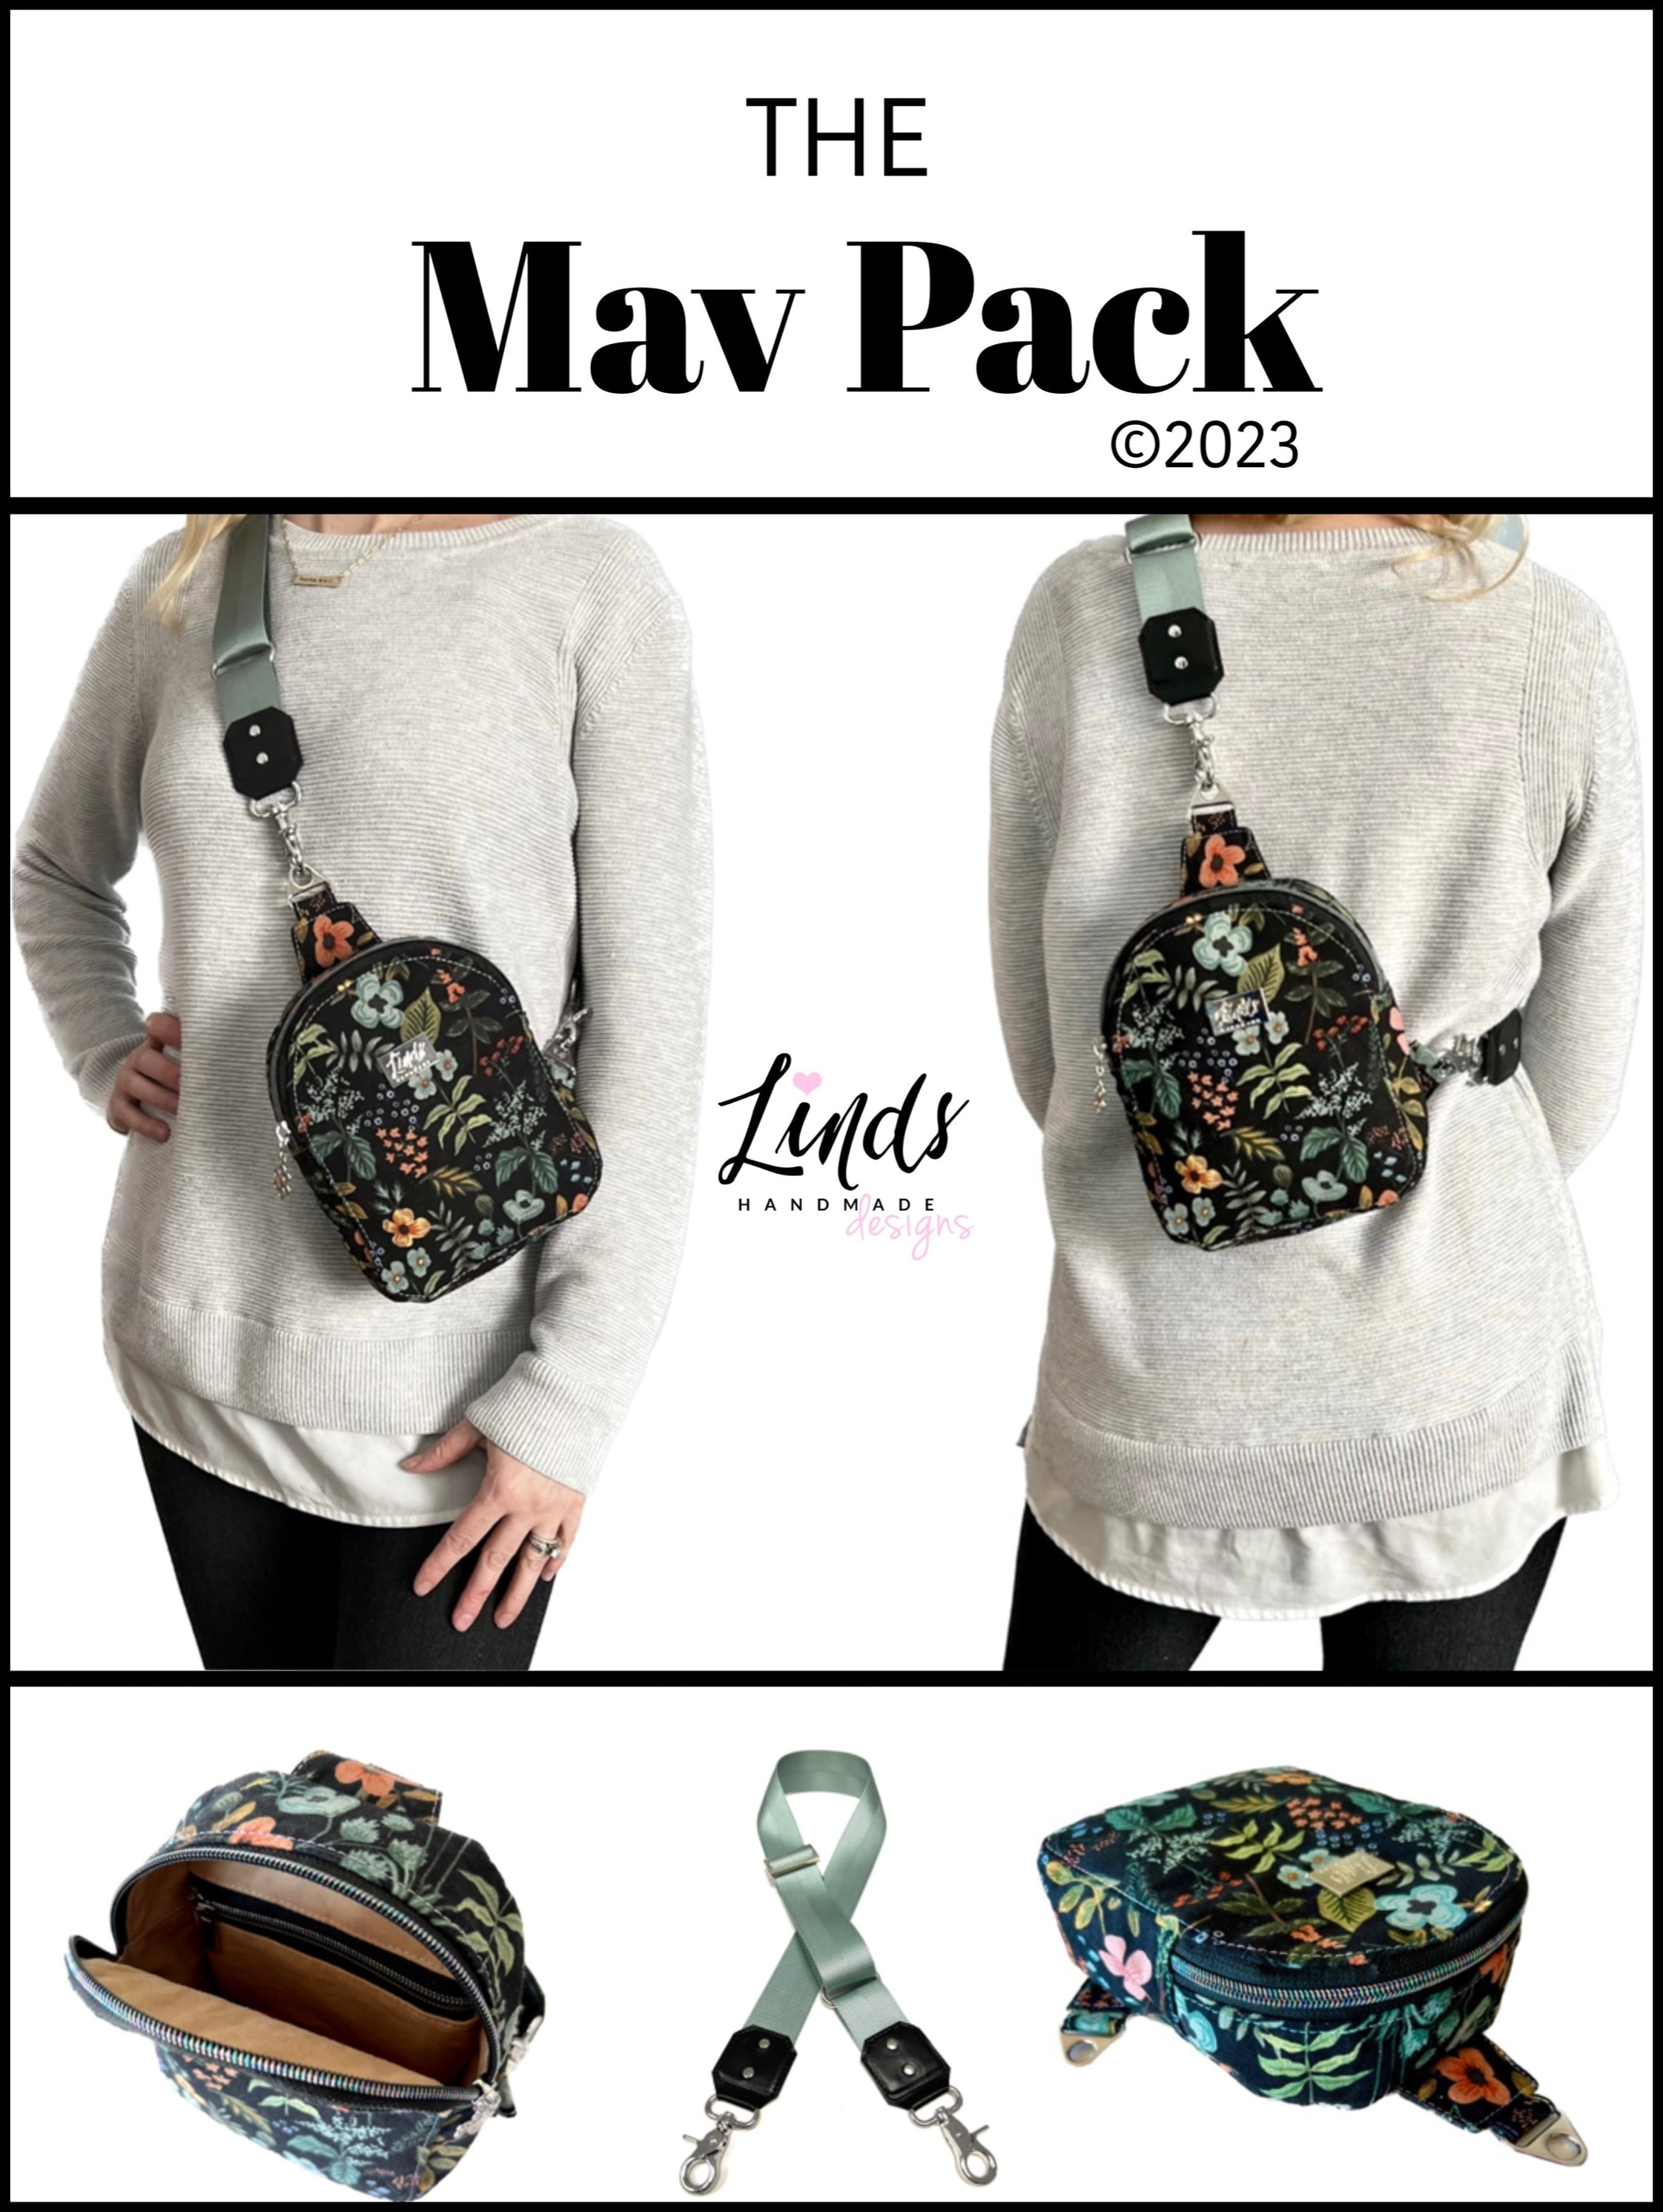 Mav Pack PDF Sewing Pattern (includes SVGs, A0 file, Projector File, a –  Linds Handmade Designs